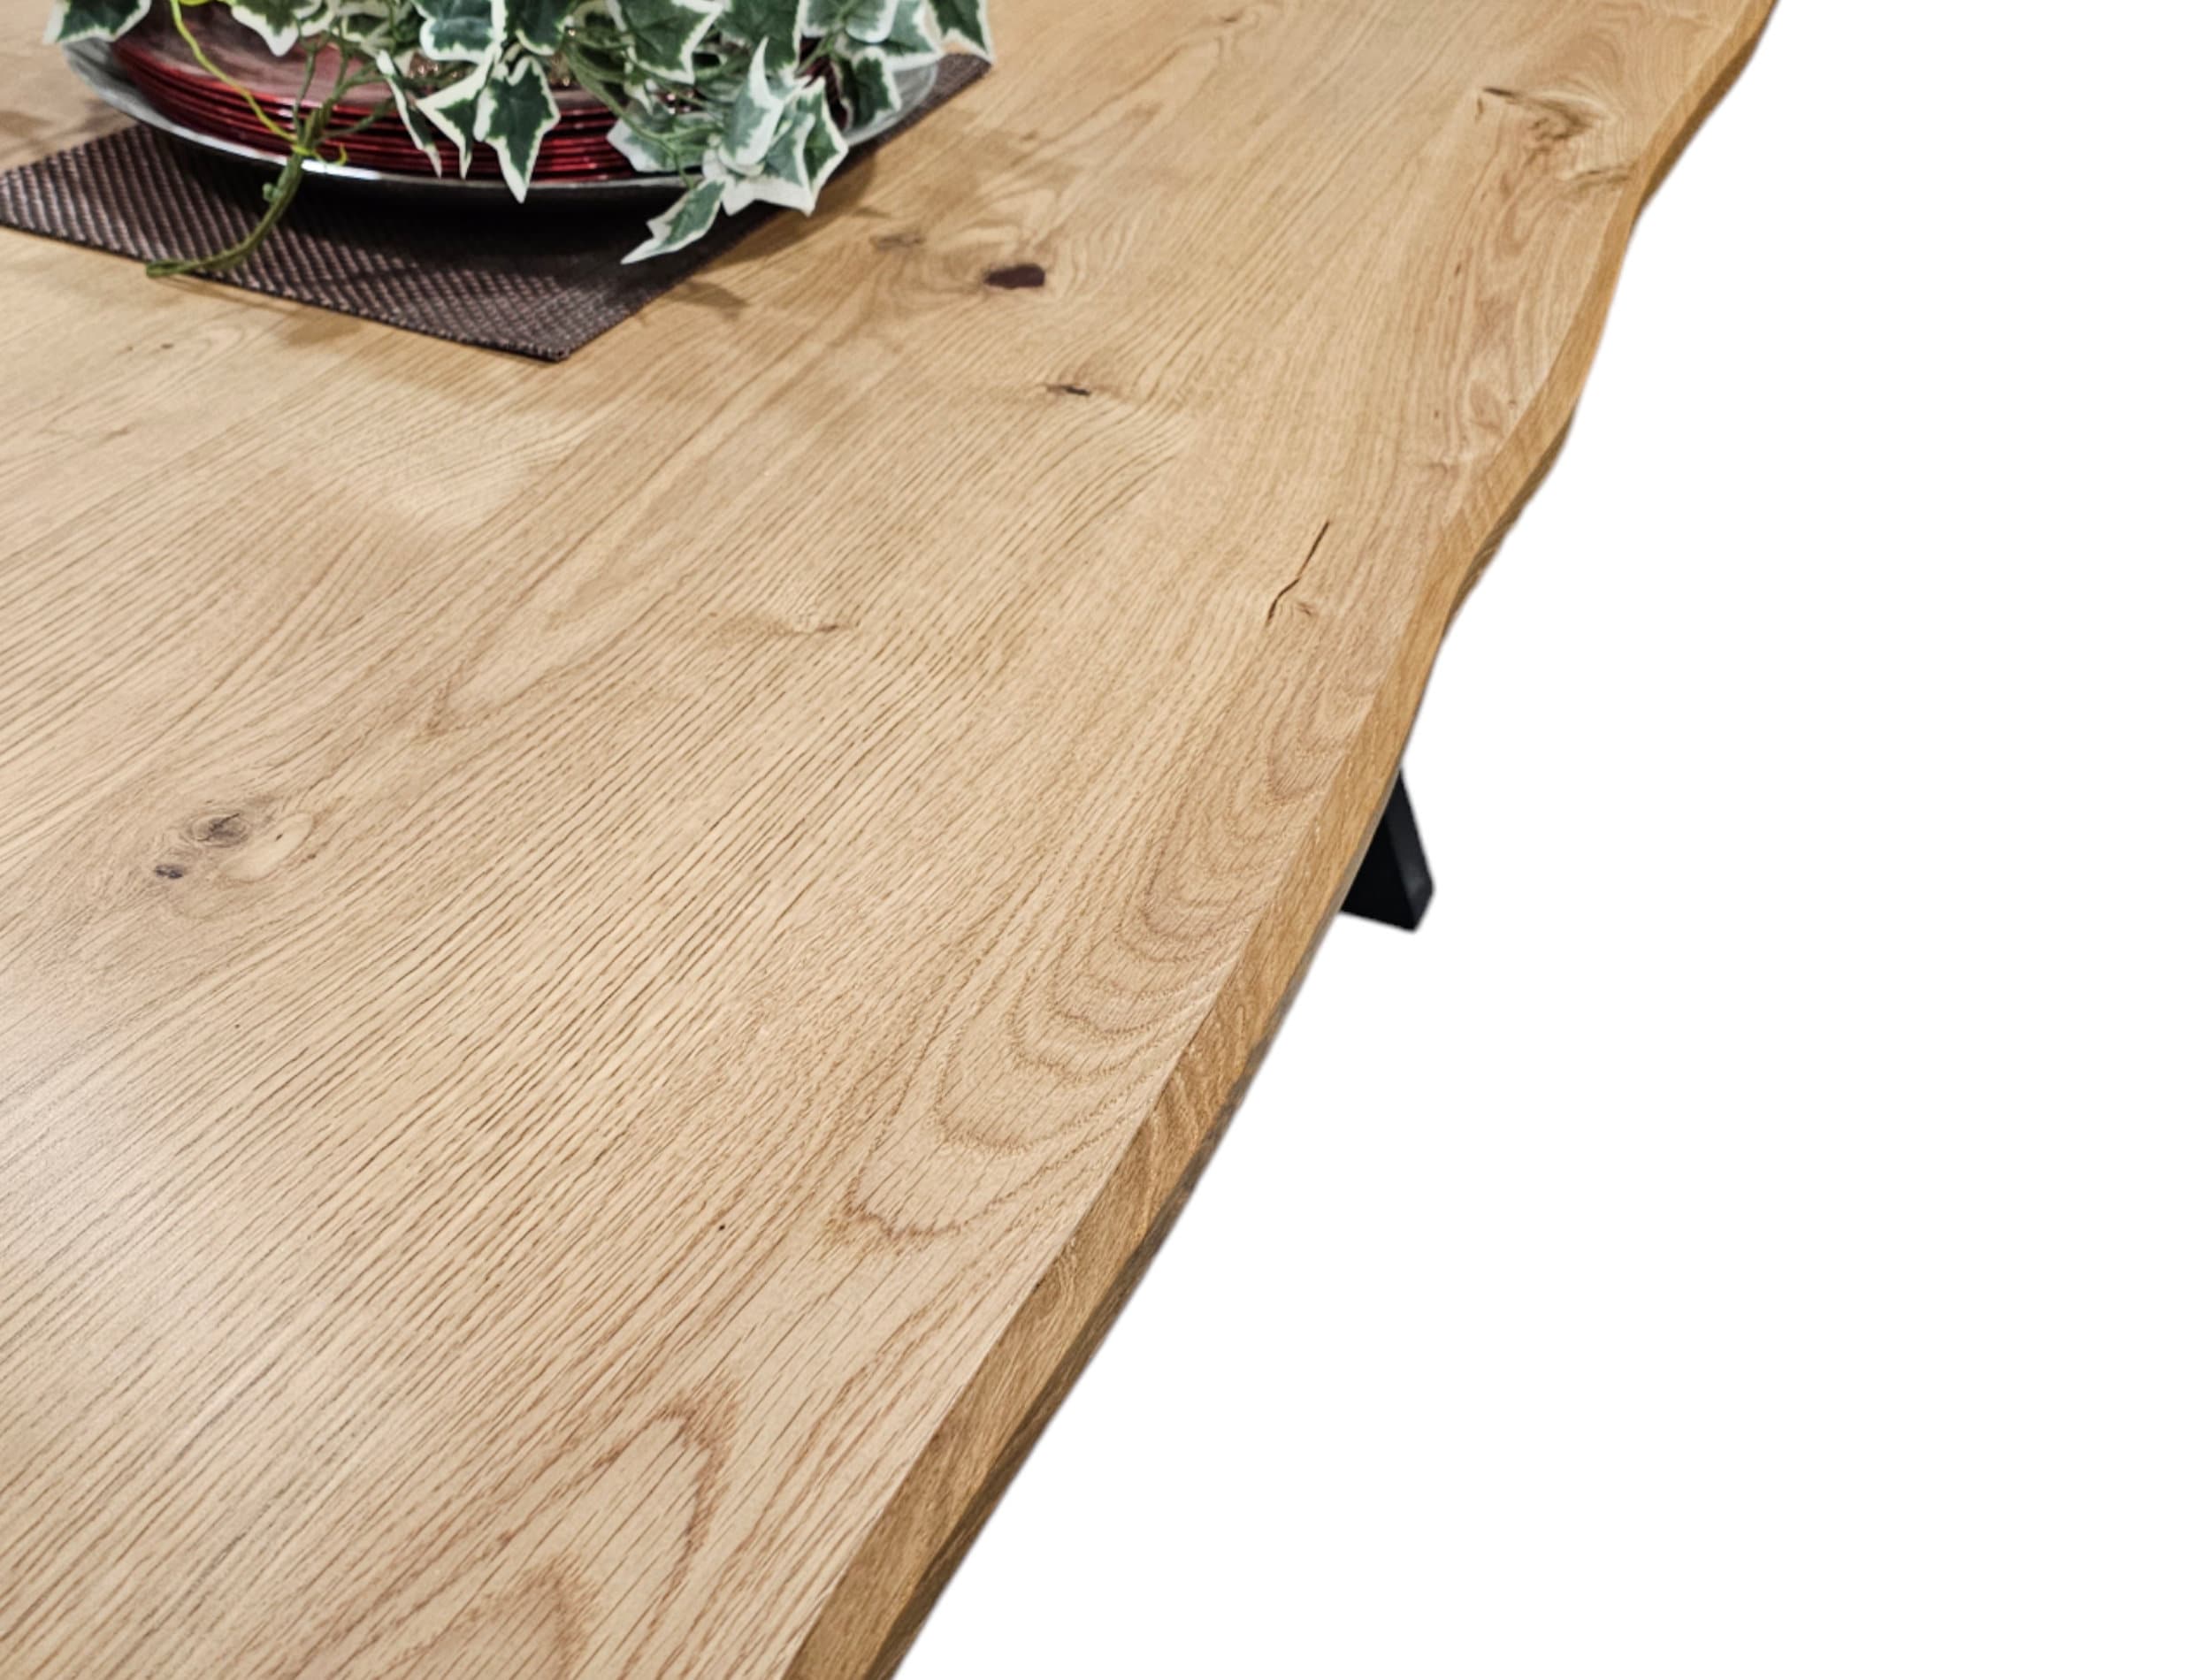 GROFurniture Natural Live Edge Oak Dining Table with Wooden Cross Leg 1.6m or 2.1m with Optional Extension.